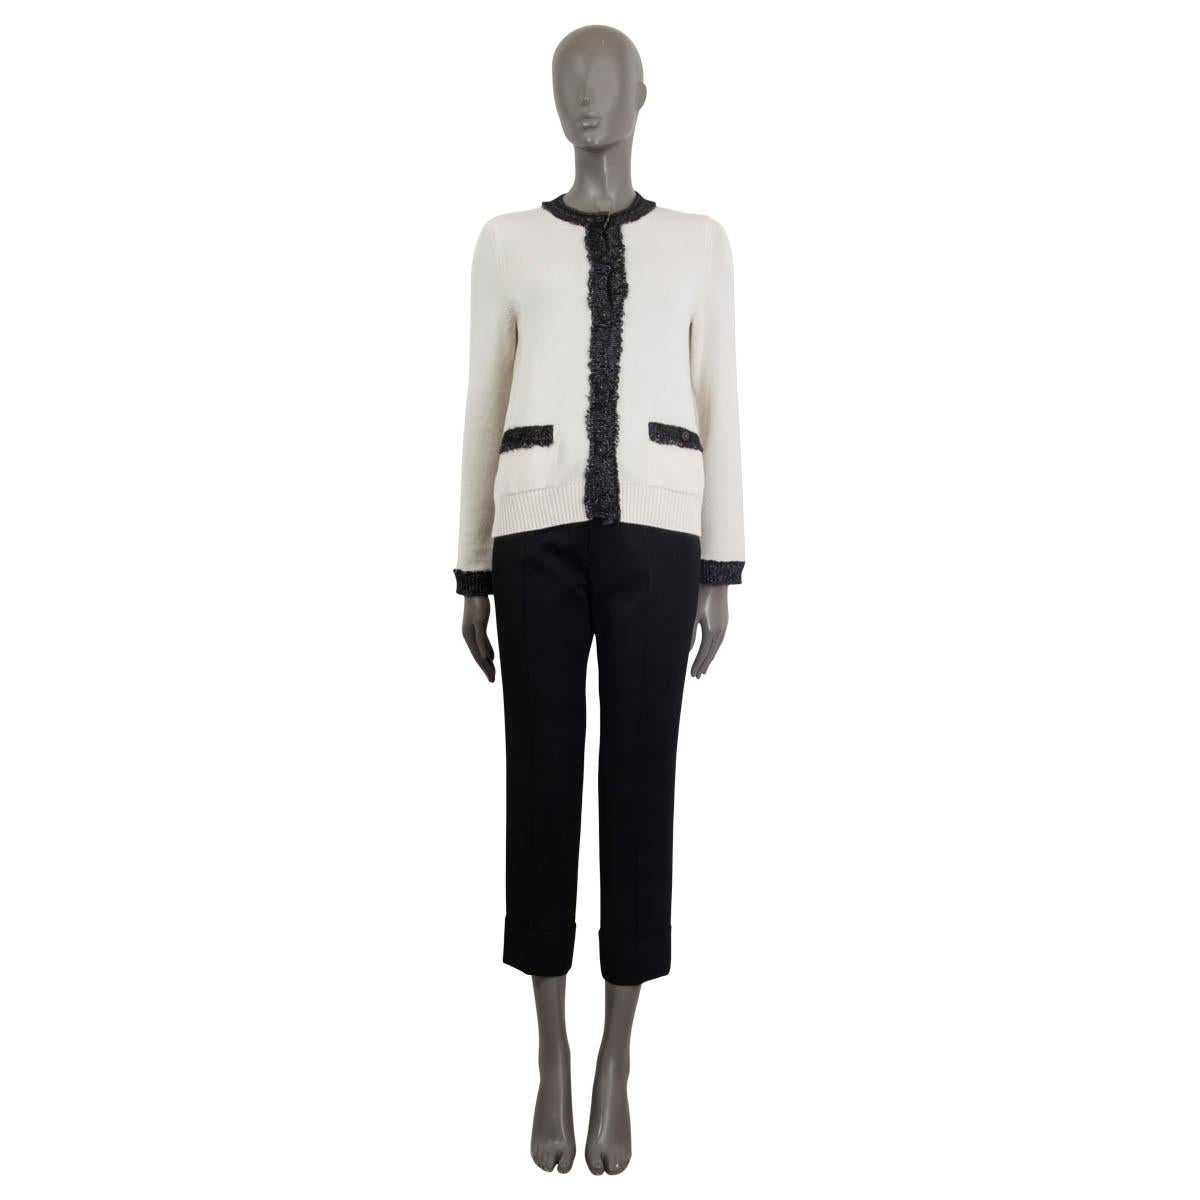 100% authentic Chanel knitted long sleeve cardigan in off-white cashmere (92%), silk (5%) and polyester (3%). Cruise 2019 collection. Comes with a charcoal button facing, collar and cuffs. Embellished with two faux pockets on the front. Opens with